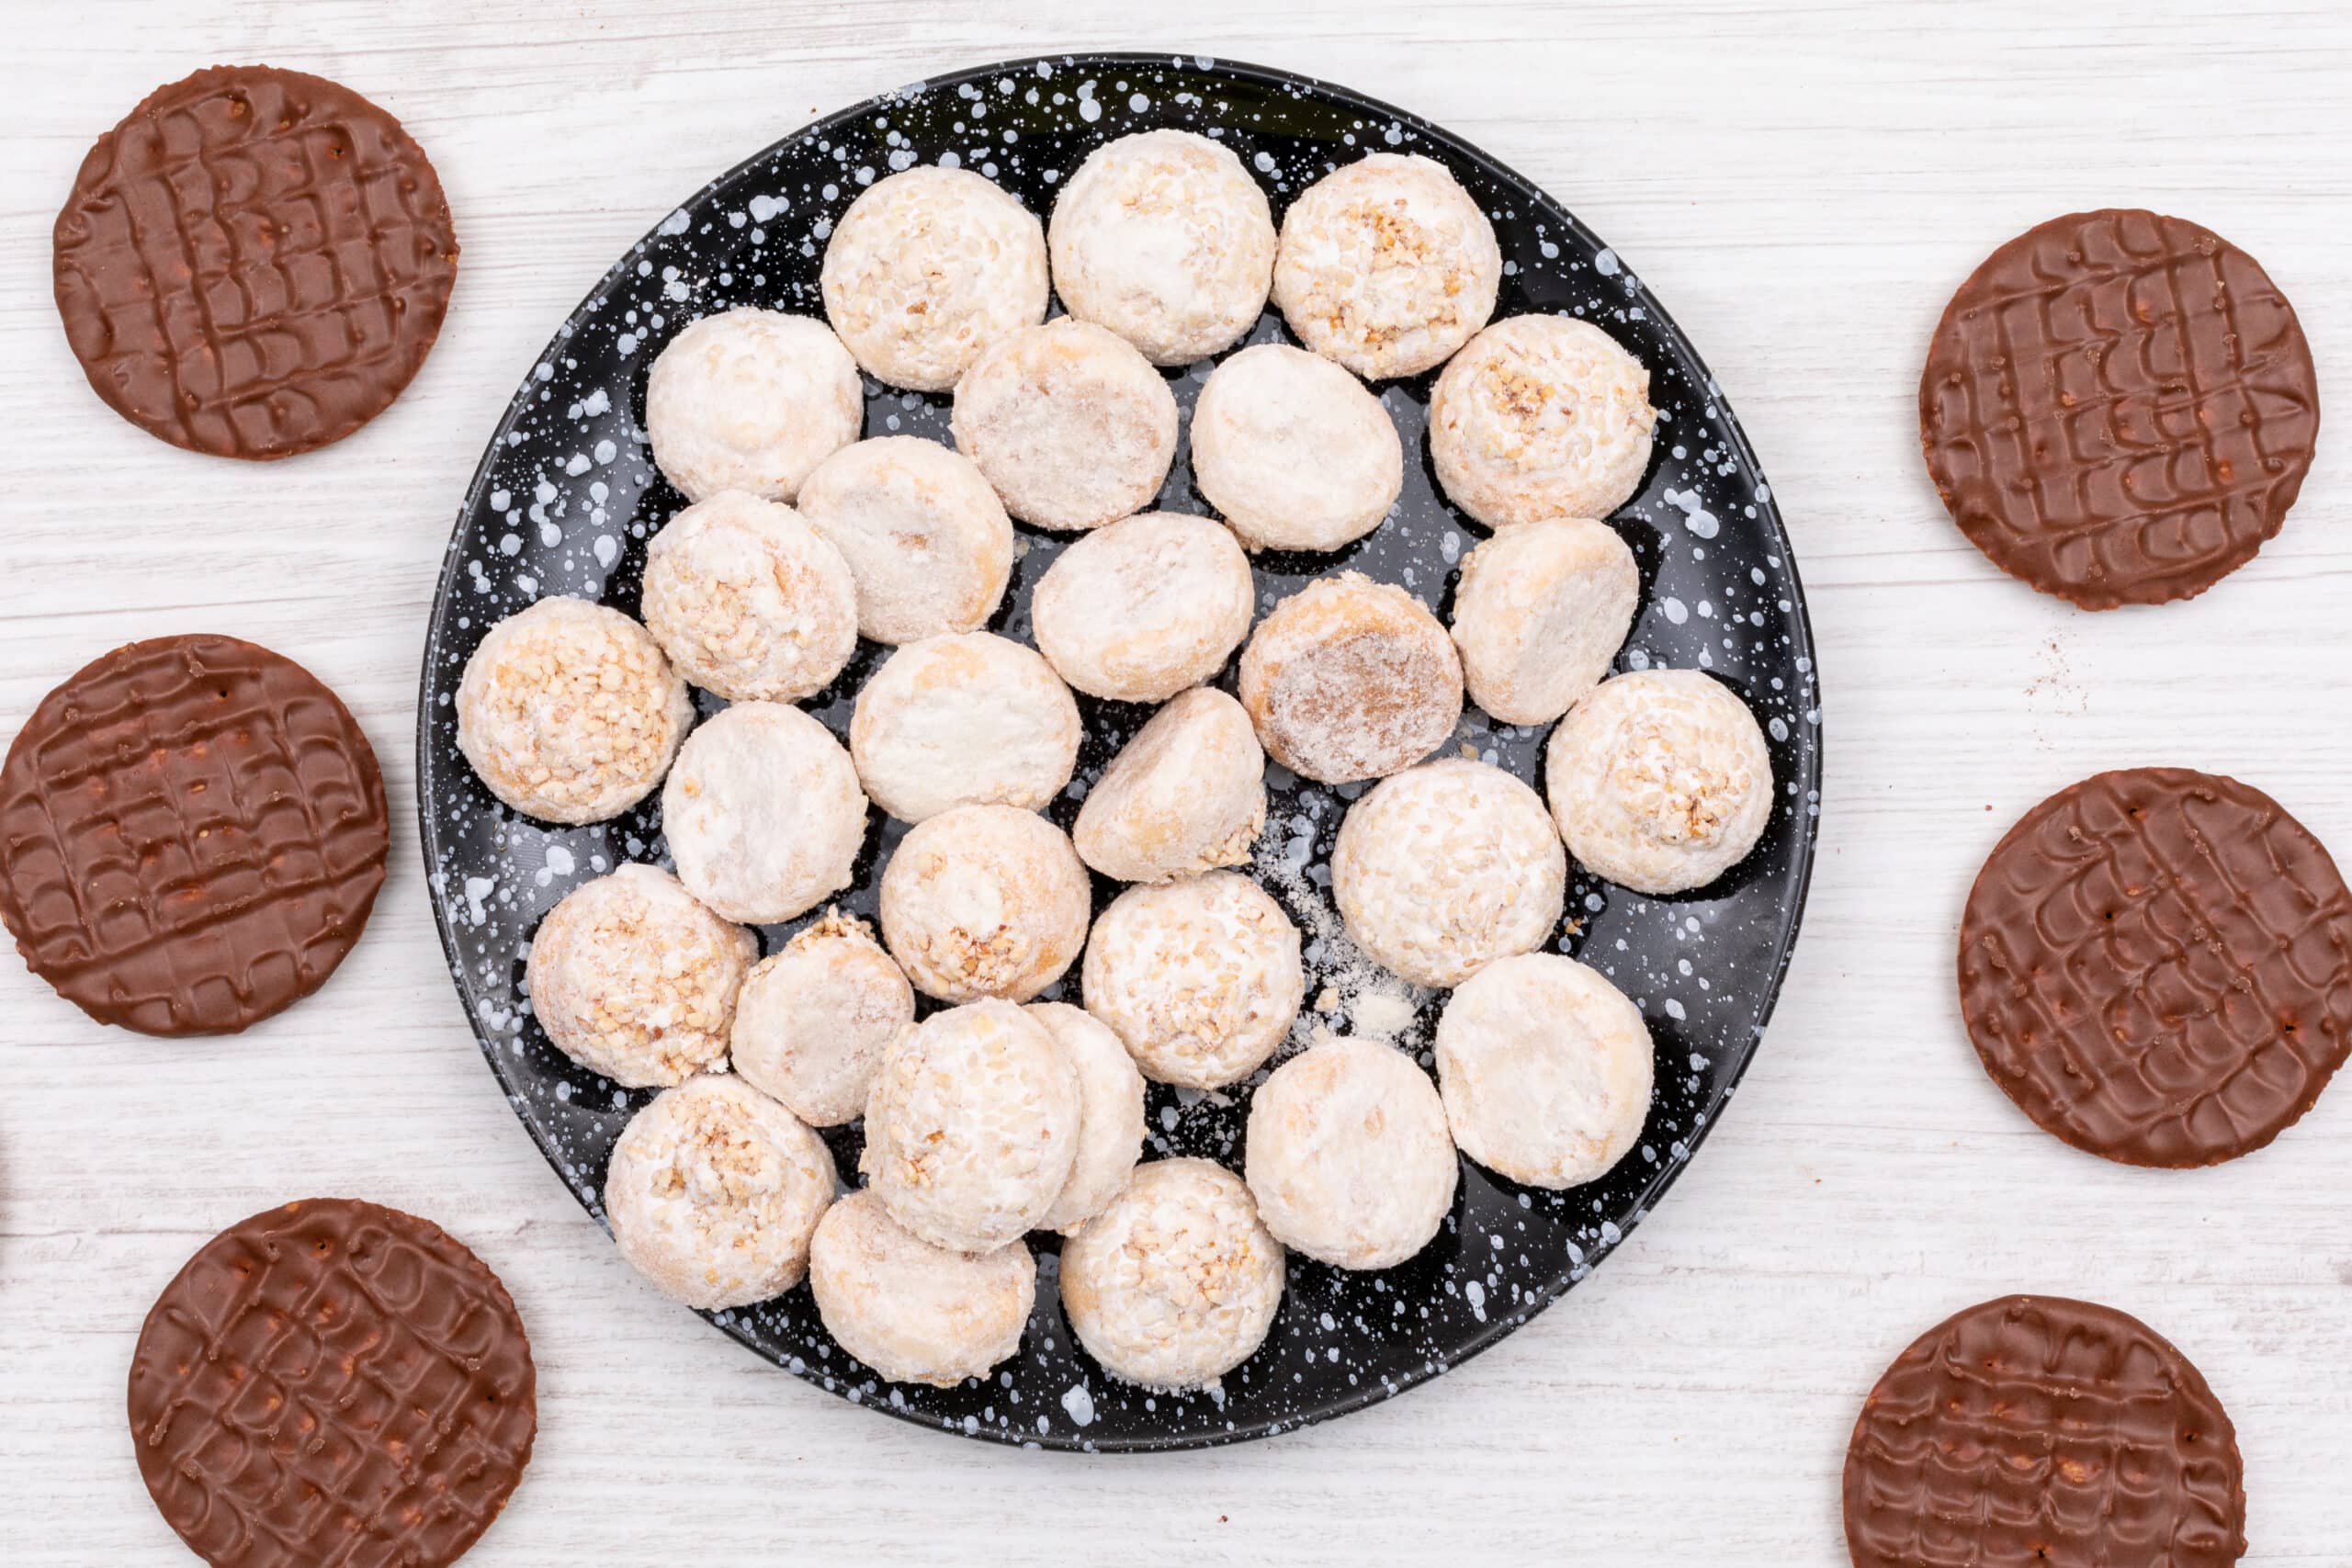 Freshly baked chocolate chip snowball cookies dusted with powdered sugar, arranged festively on a holiday-themed plate